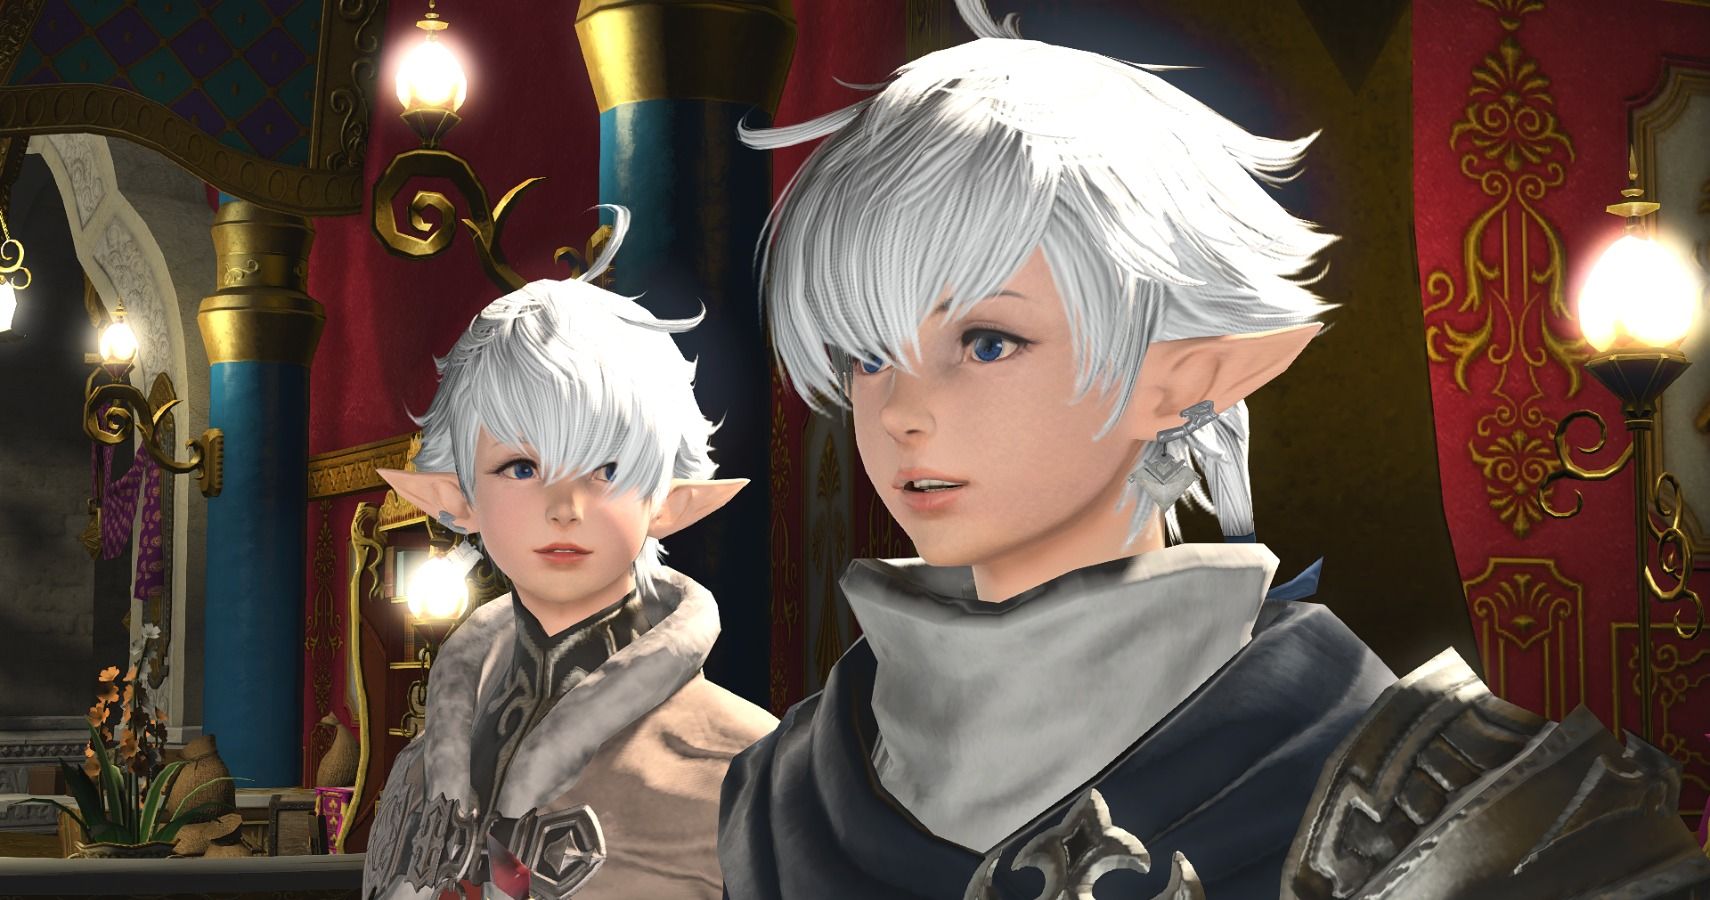 FF14 Alisaie and Alphinaud